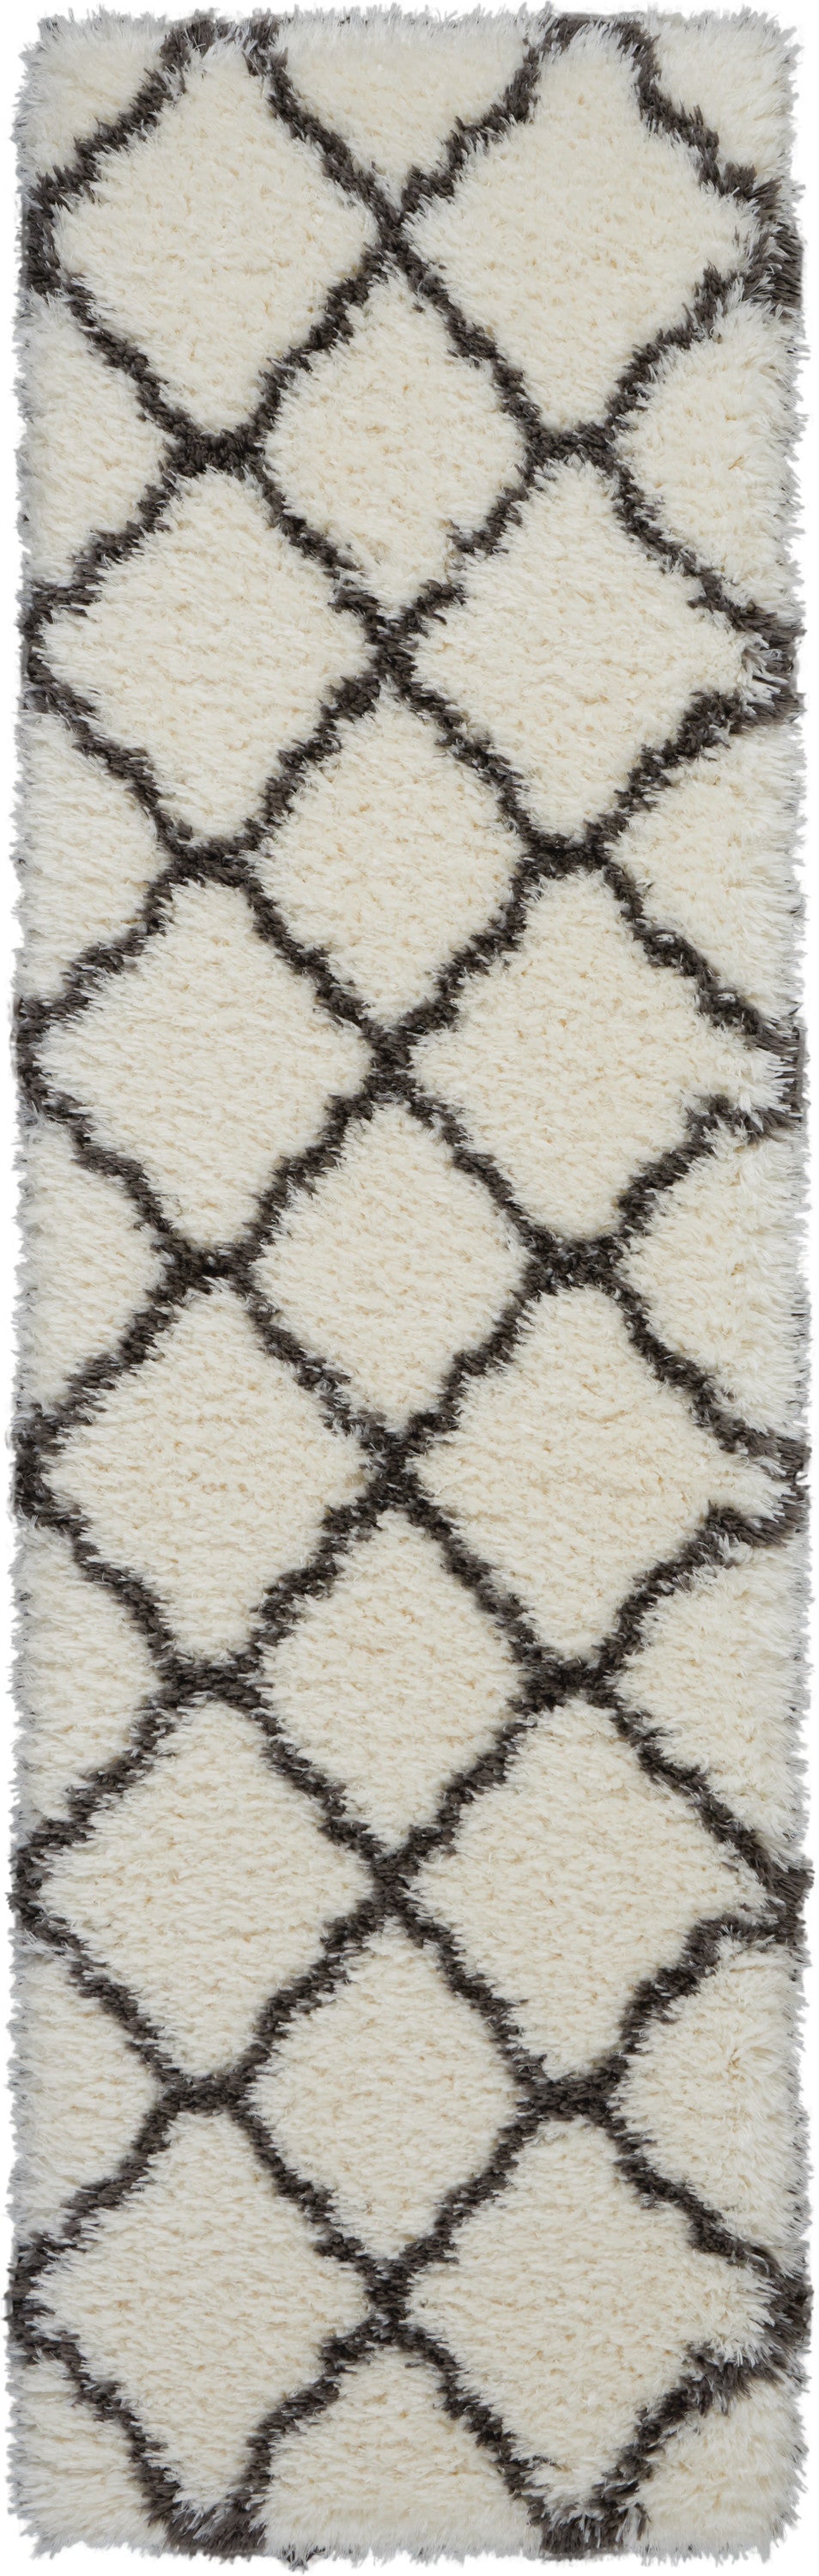 Nourison Luxe Shag LXS02 White 8' Runner Hallway Rug LXS02 Ivory/Charcoal